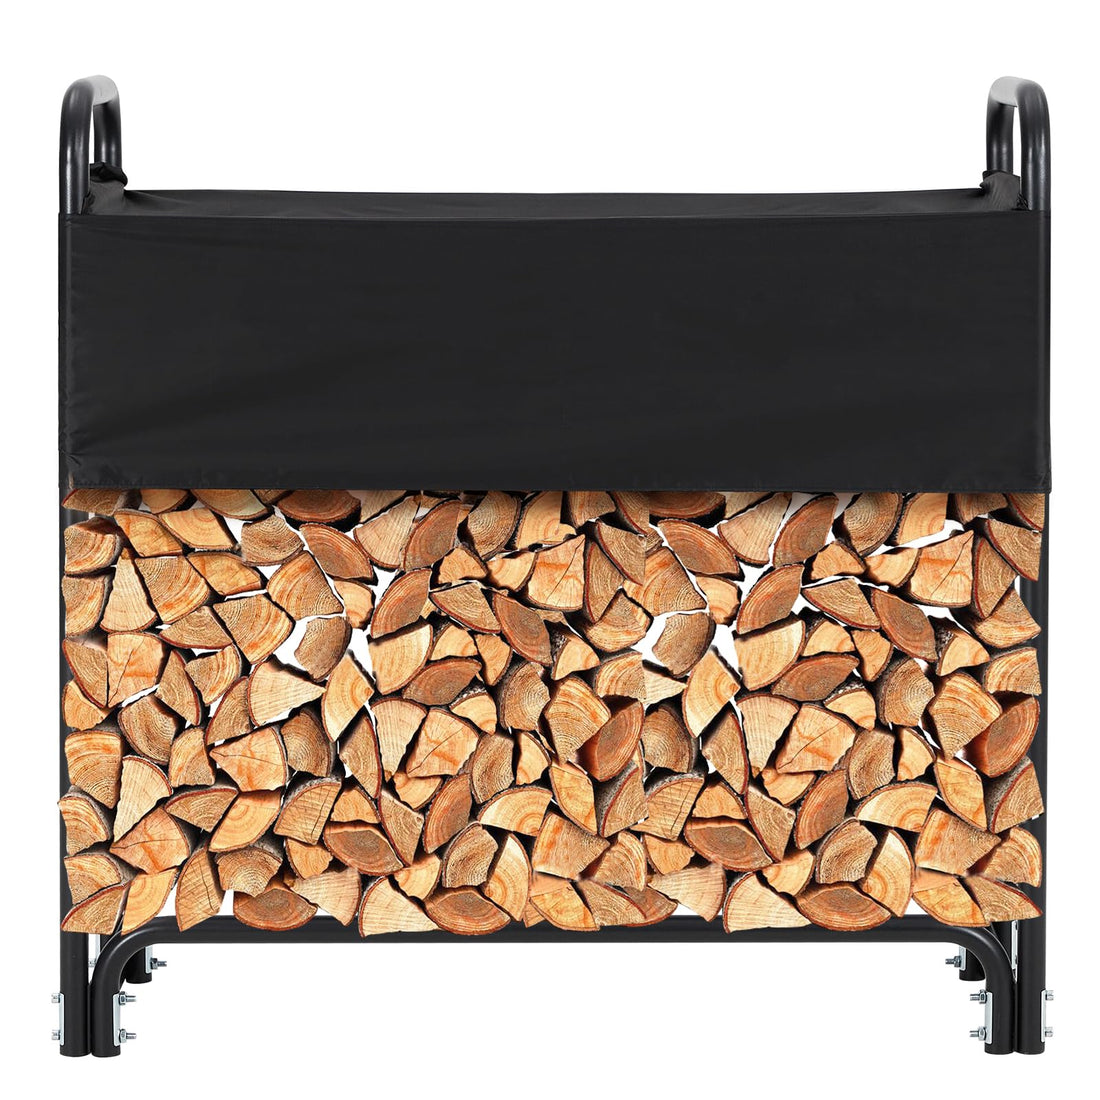 GARVEE 4FT Firewood Rack Outdoor Firewood Rack Outdoor with Cover for Fireplace Wood Storage